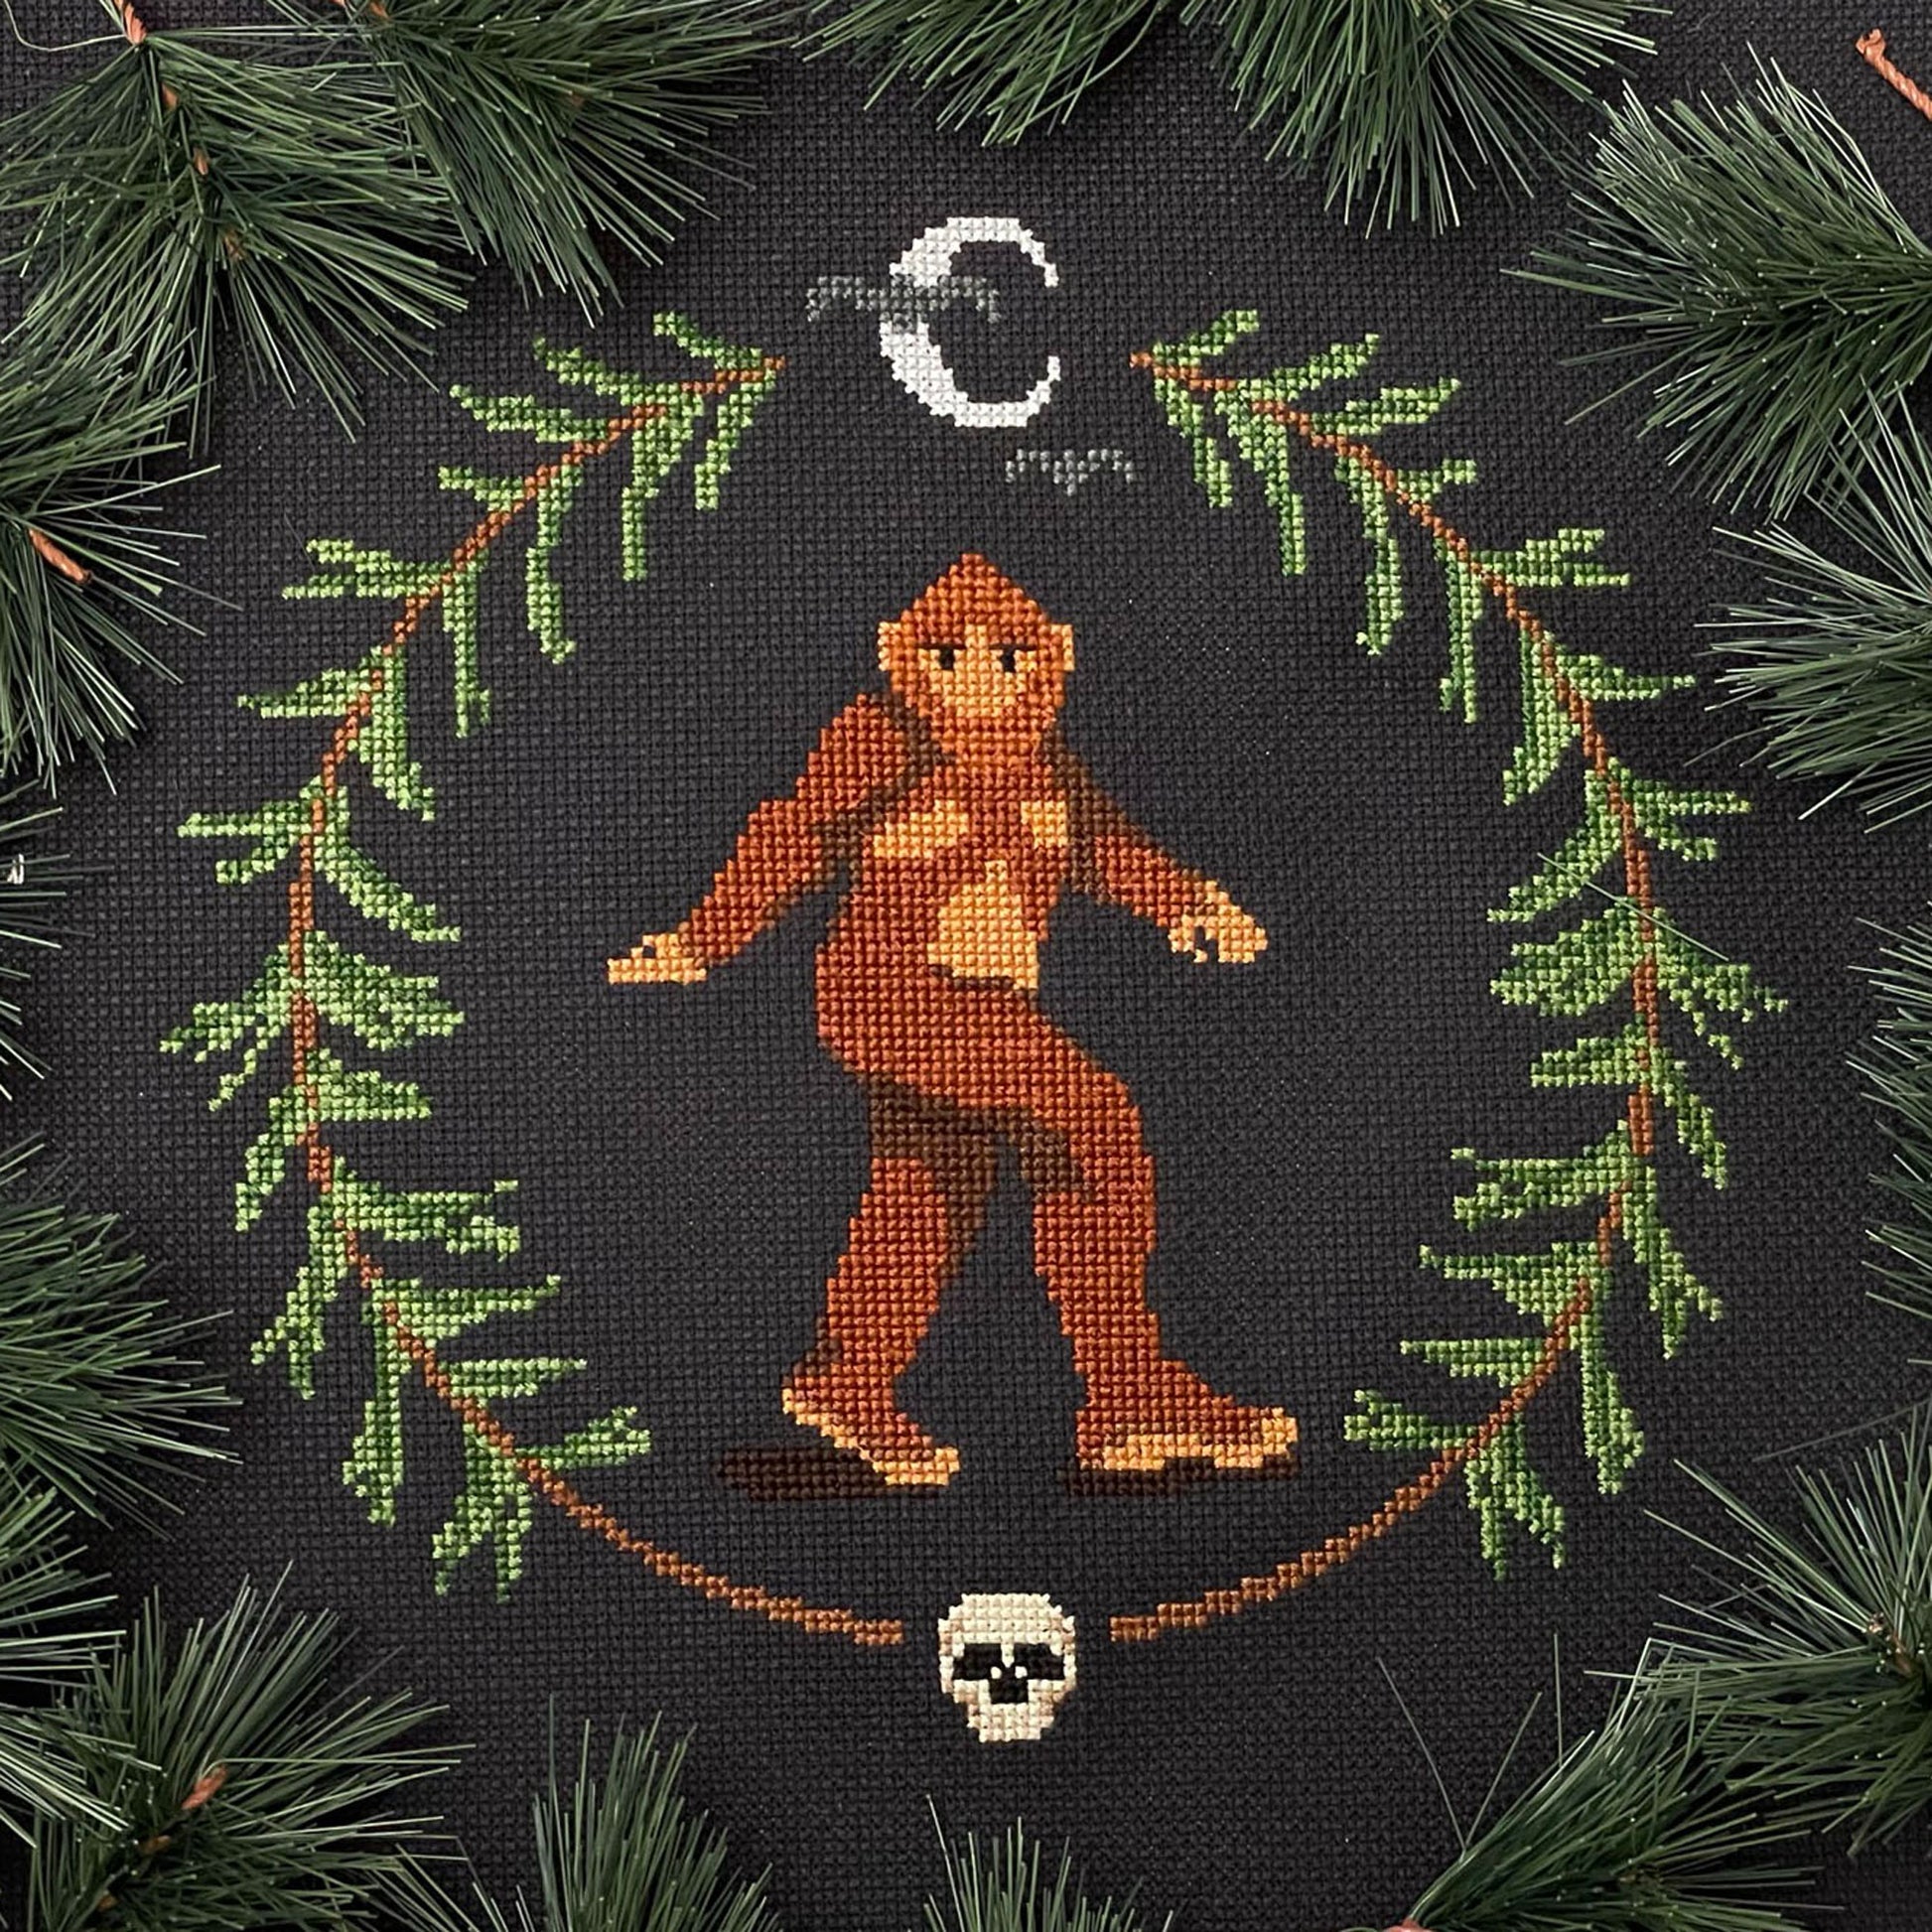 Striding Bigfoot centered inside a pine wreath with a skull at the bottom and a stylized half moon and bats at the top